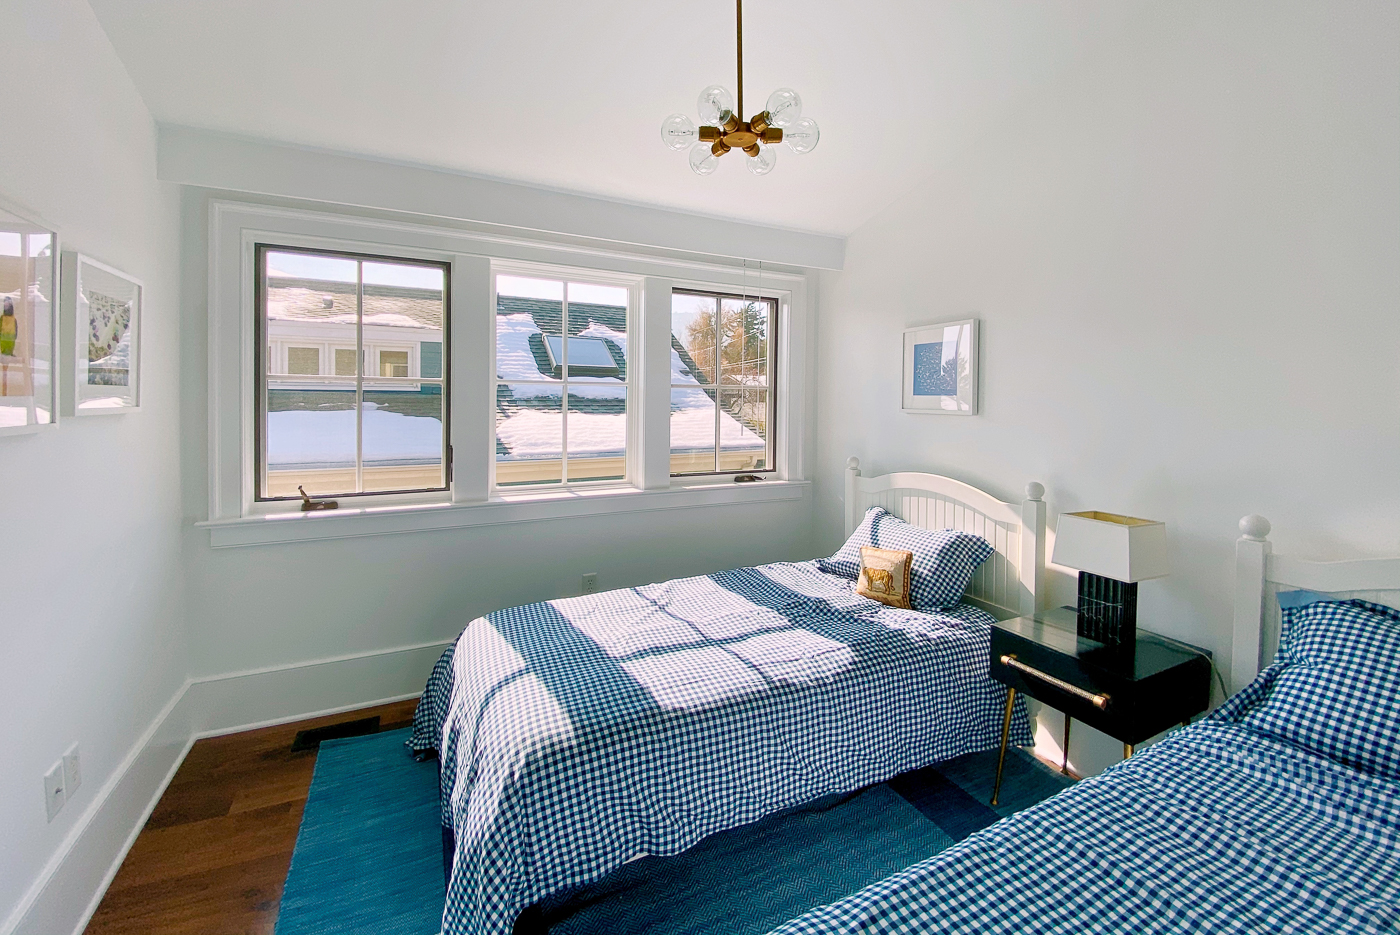 Remodeled kids bedroom with two twin beds and large windows